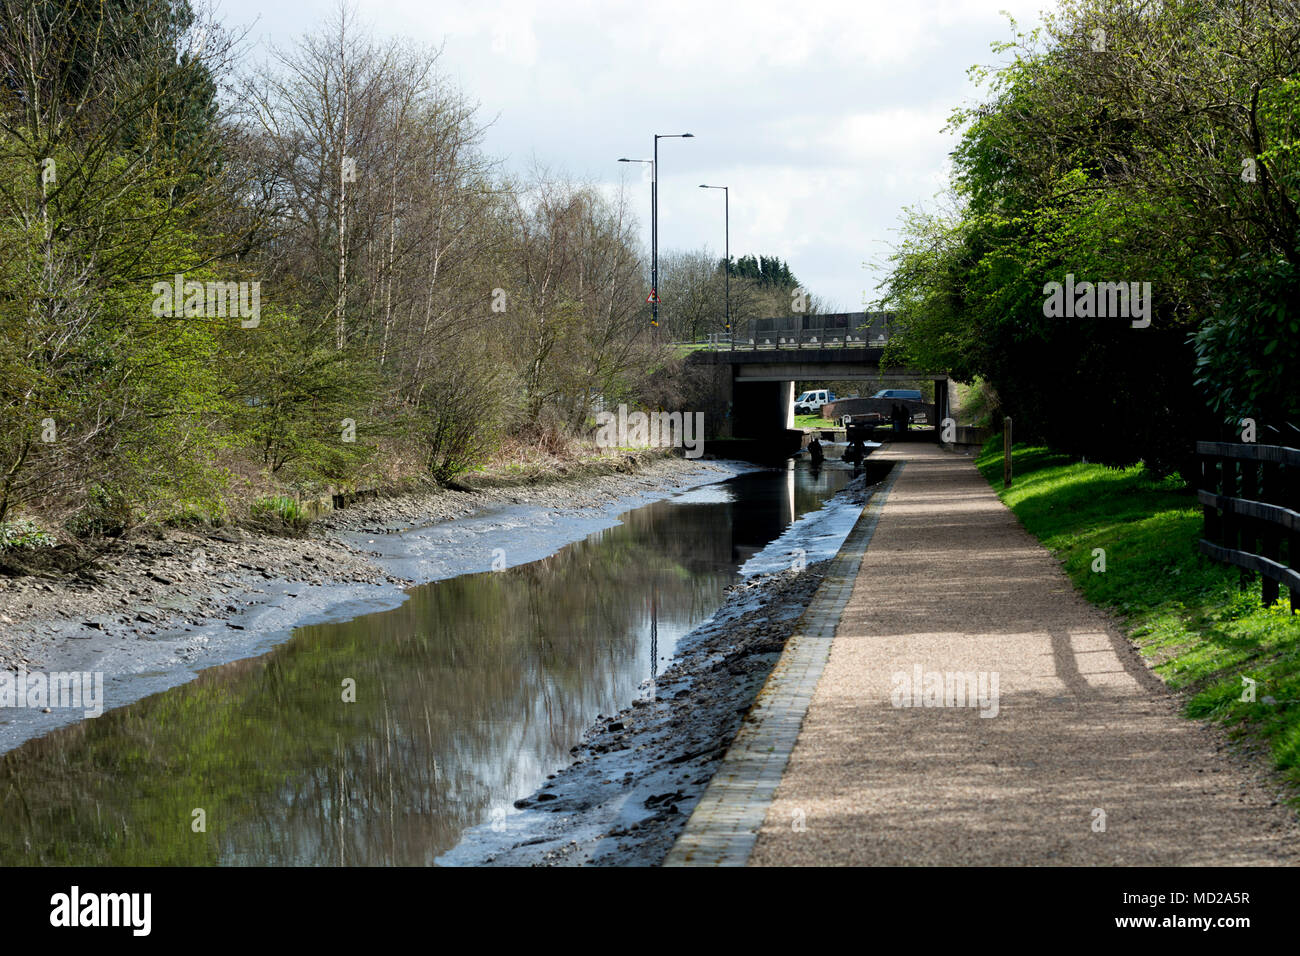 The drained Birmingham and Fazeley Canal near the A38 flyover, Minworth, West Midlands, UK Stock Photo